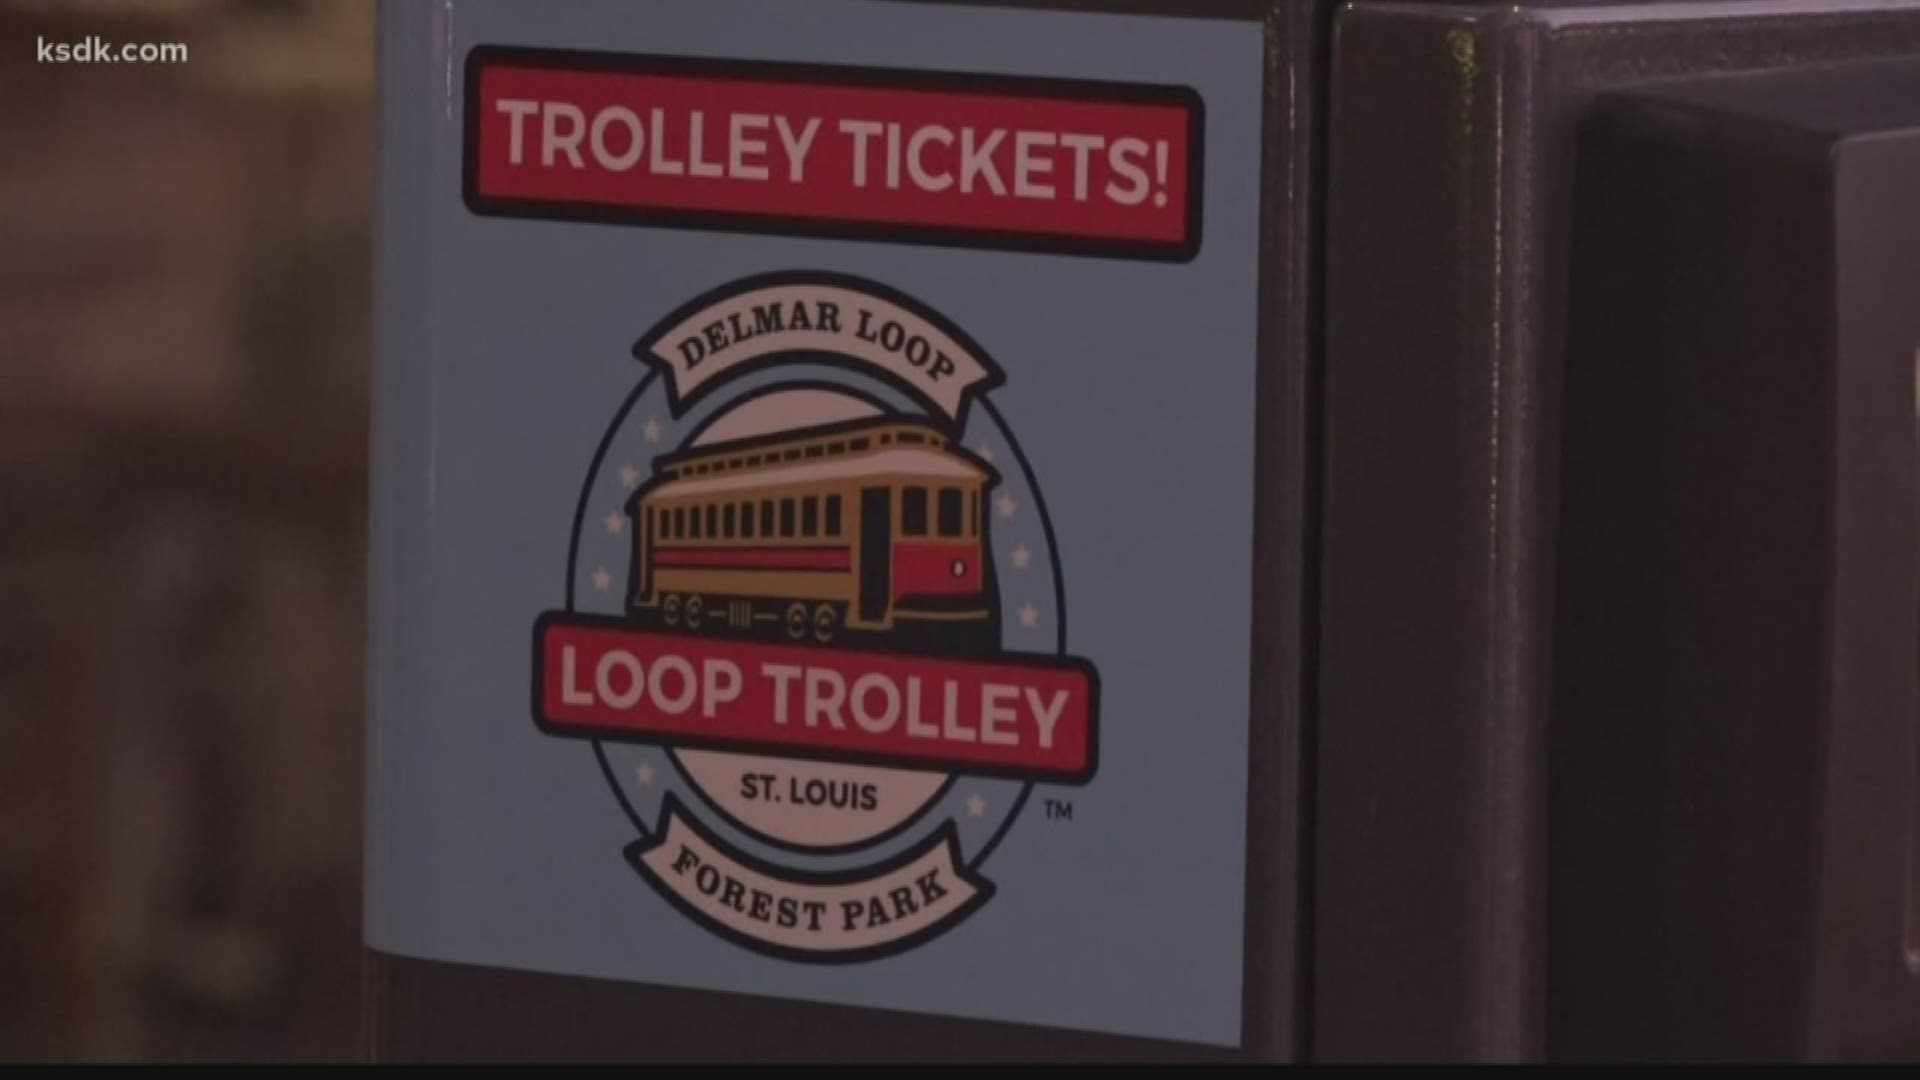 The taxing district that helped construct the trolley voted to give the company that runs it a $90,000 loan.